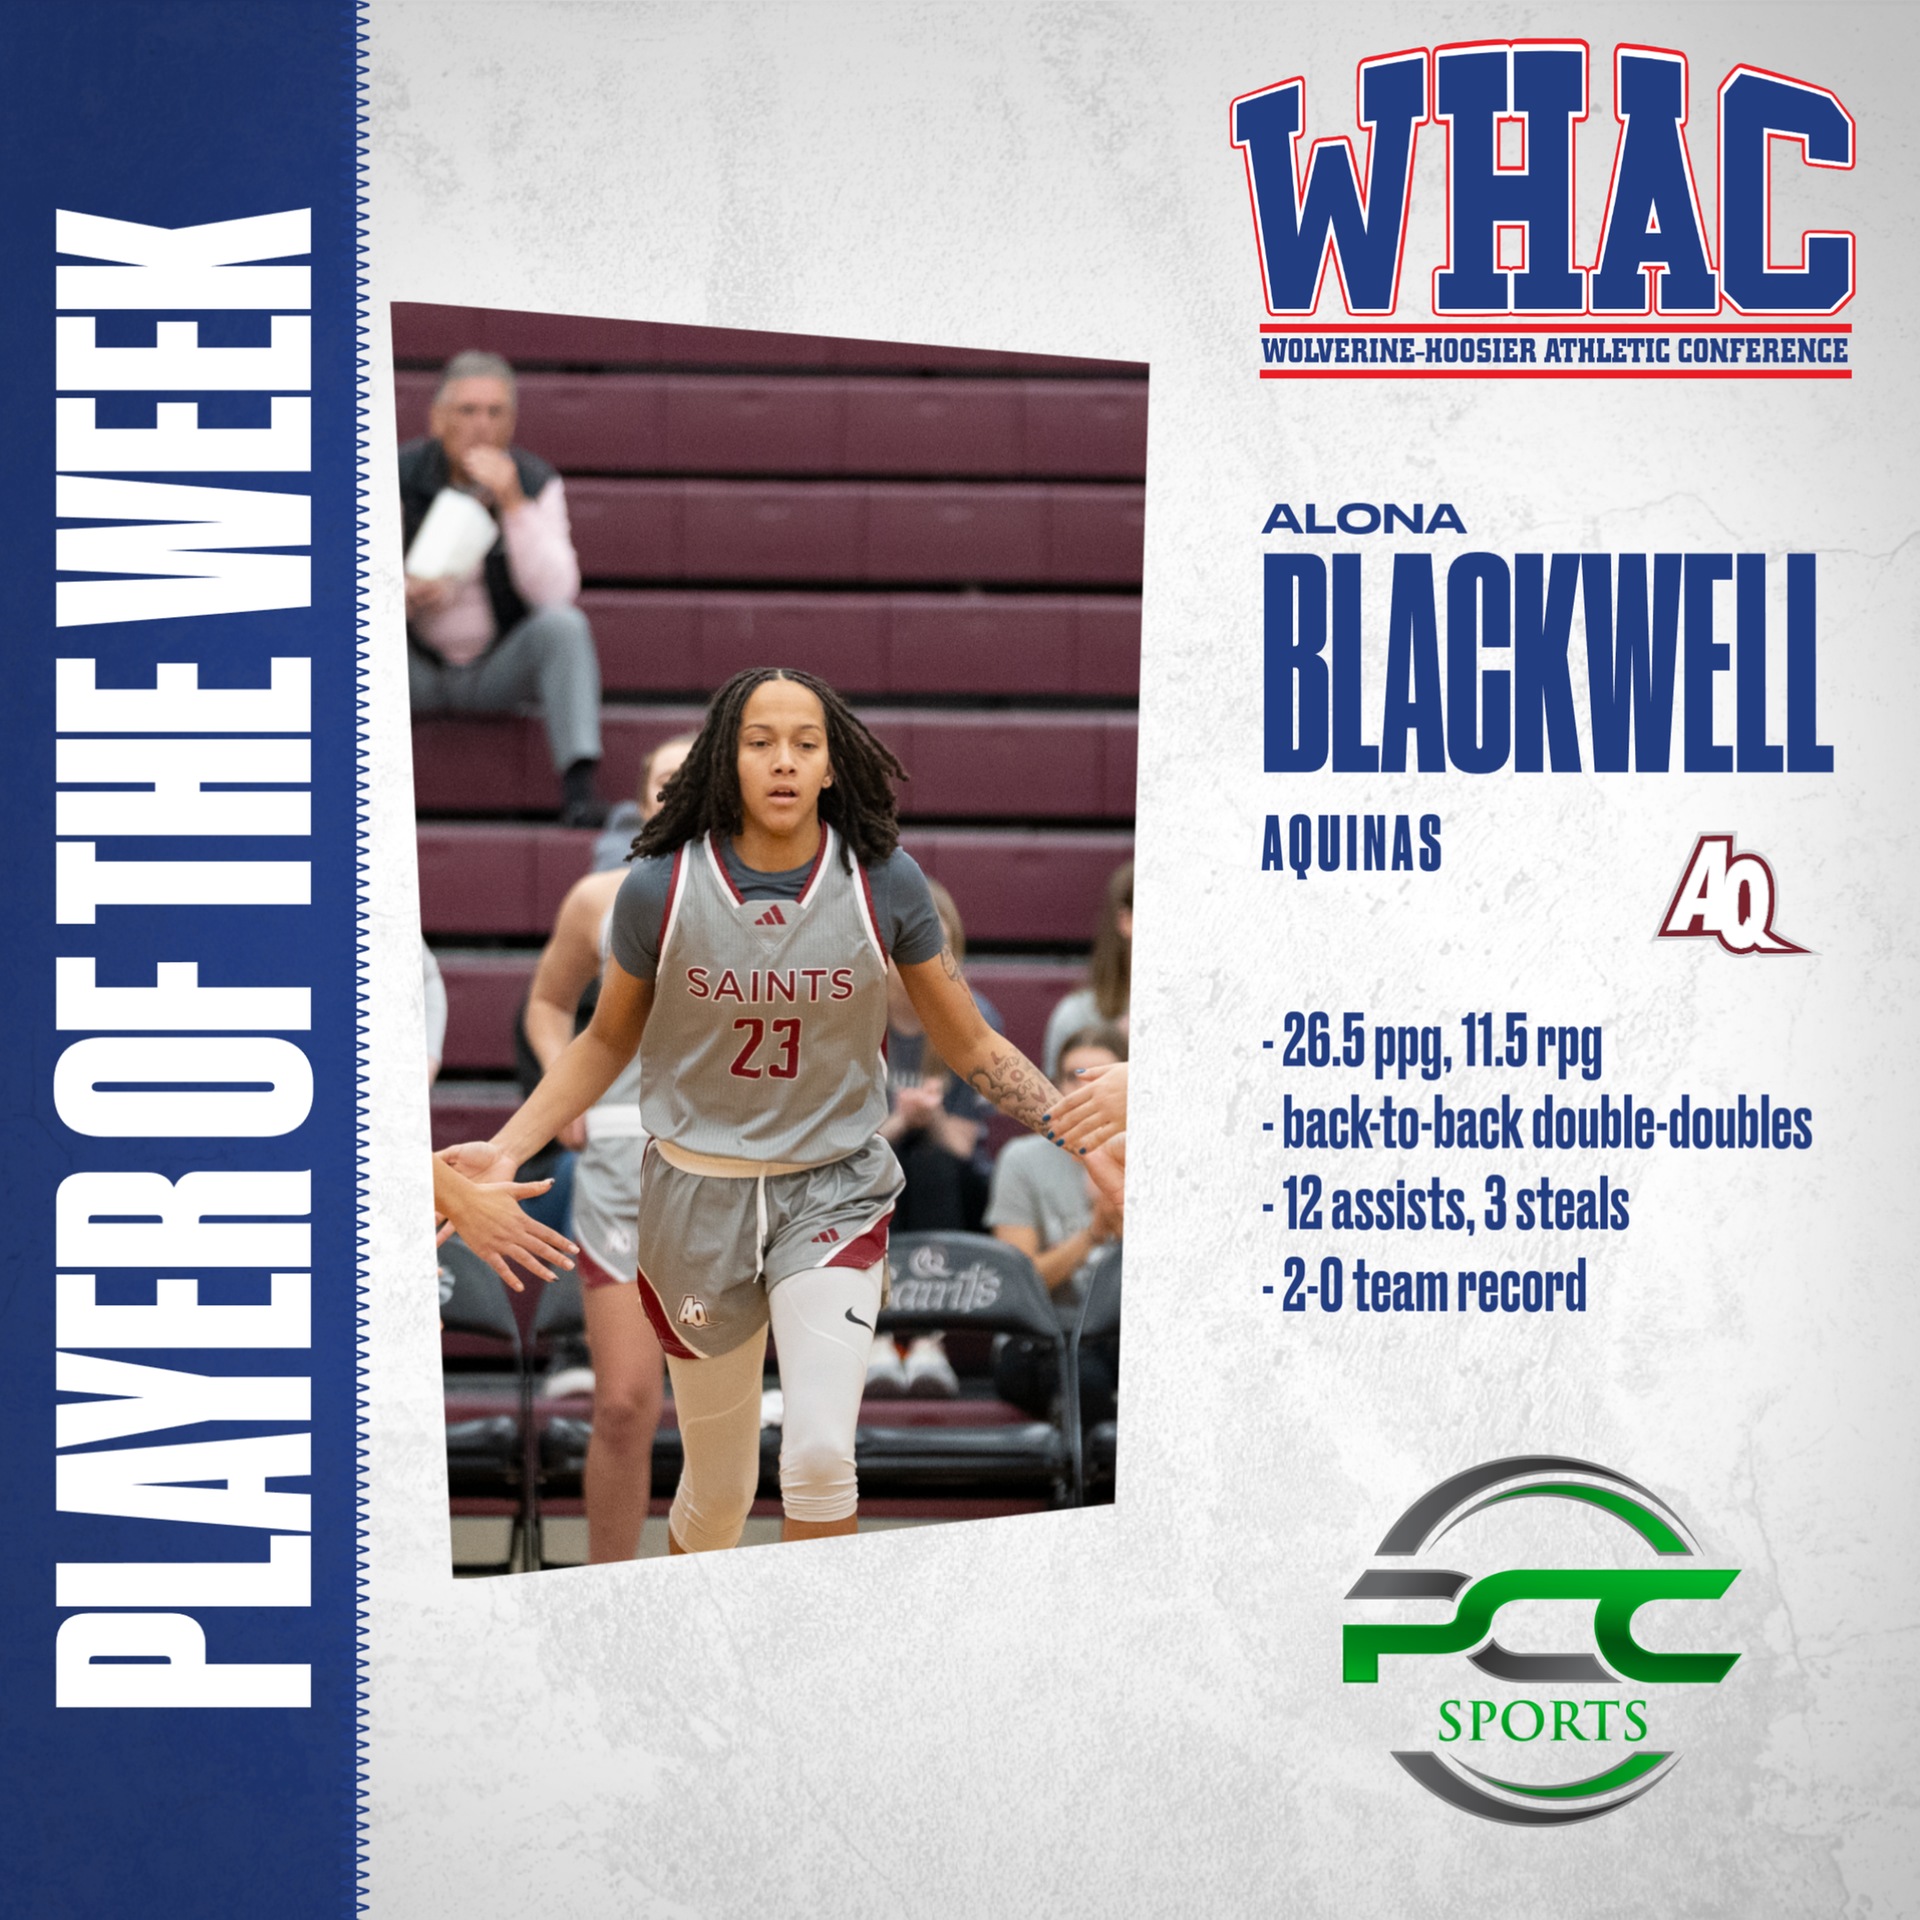 Aquinas' Blackwell named WHAC Player of the Week